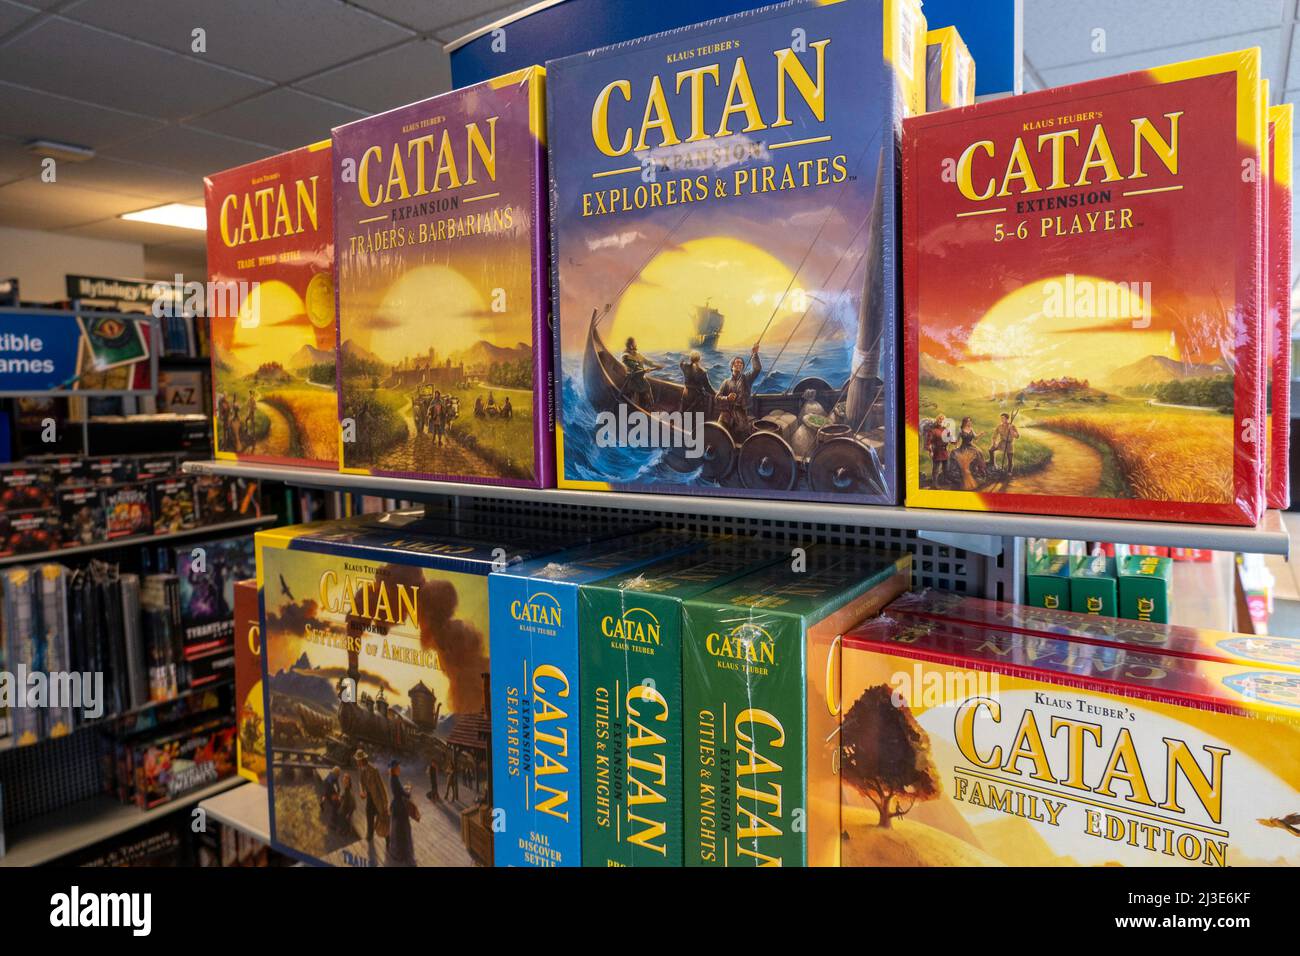 Barnes & Noble Booksellers has an extensive line of board games and is located at 555 Fifth Avenue in New York City, USA  2022 Stock Photo